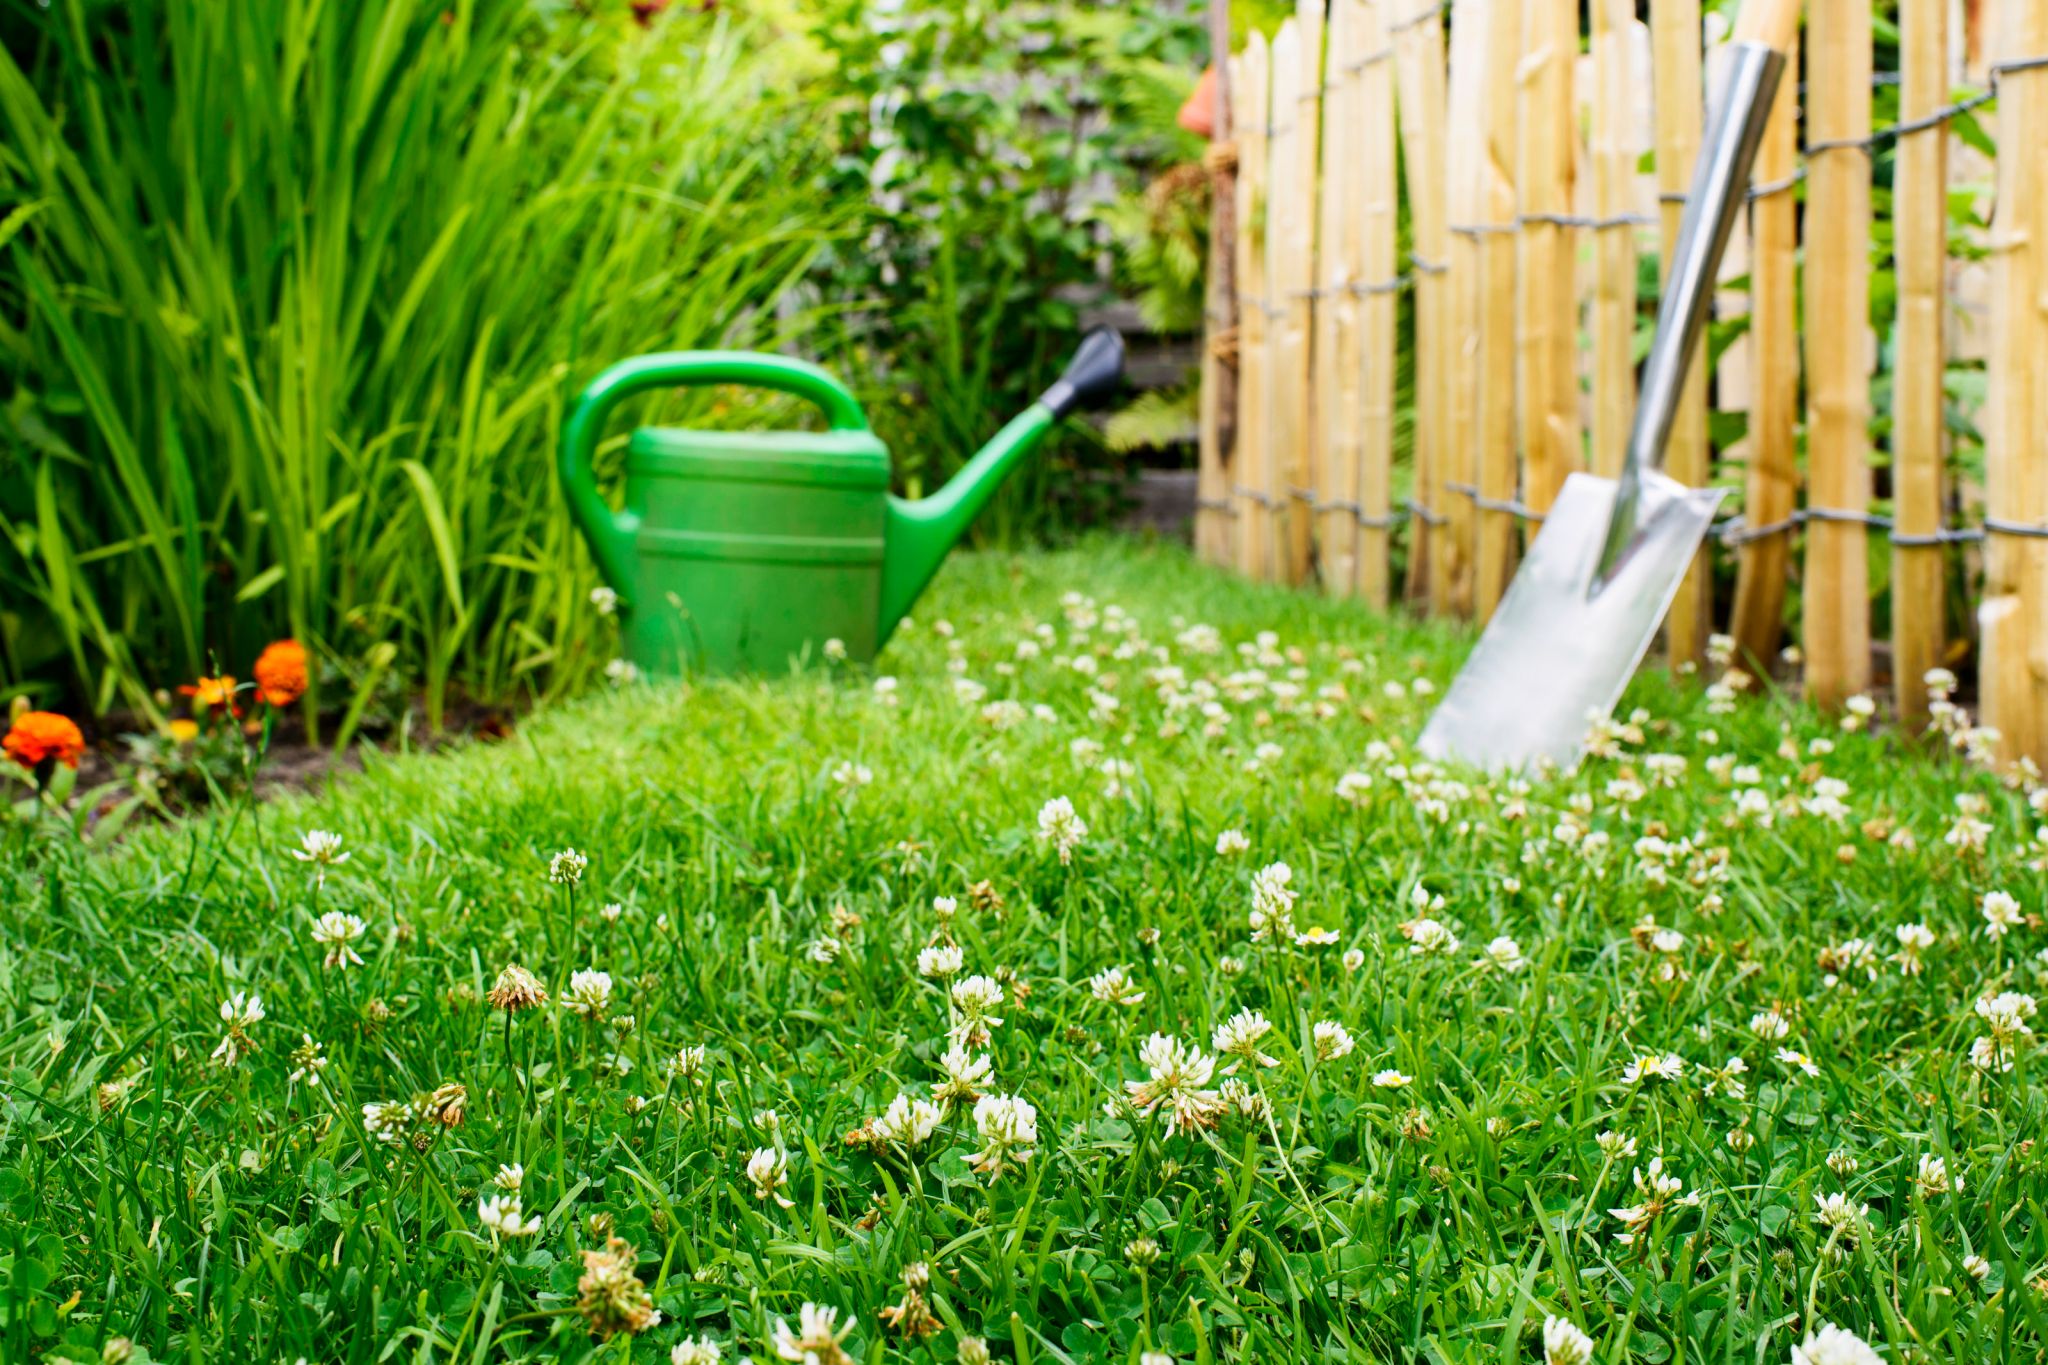 A view of a beautiful, green clover lawn with a watering can and a shovel.